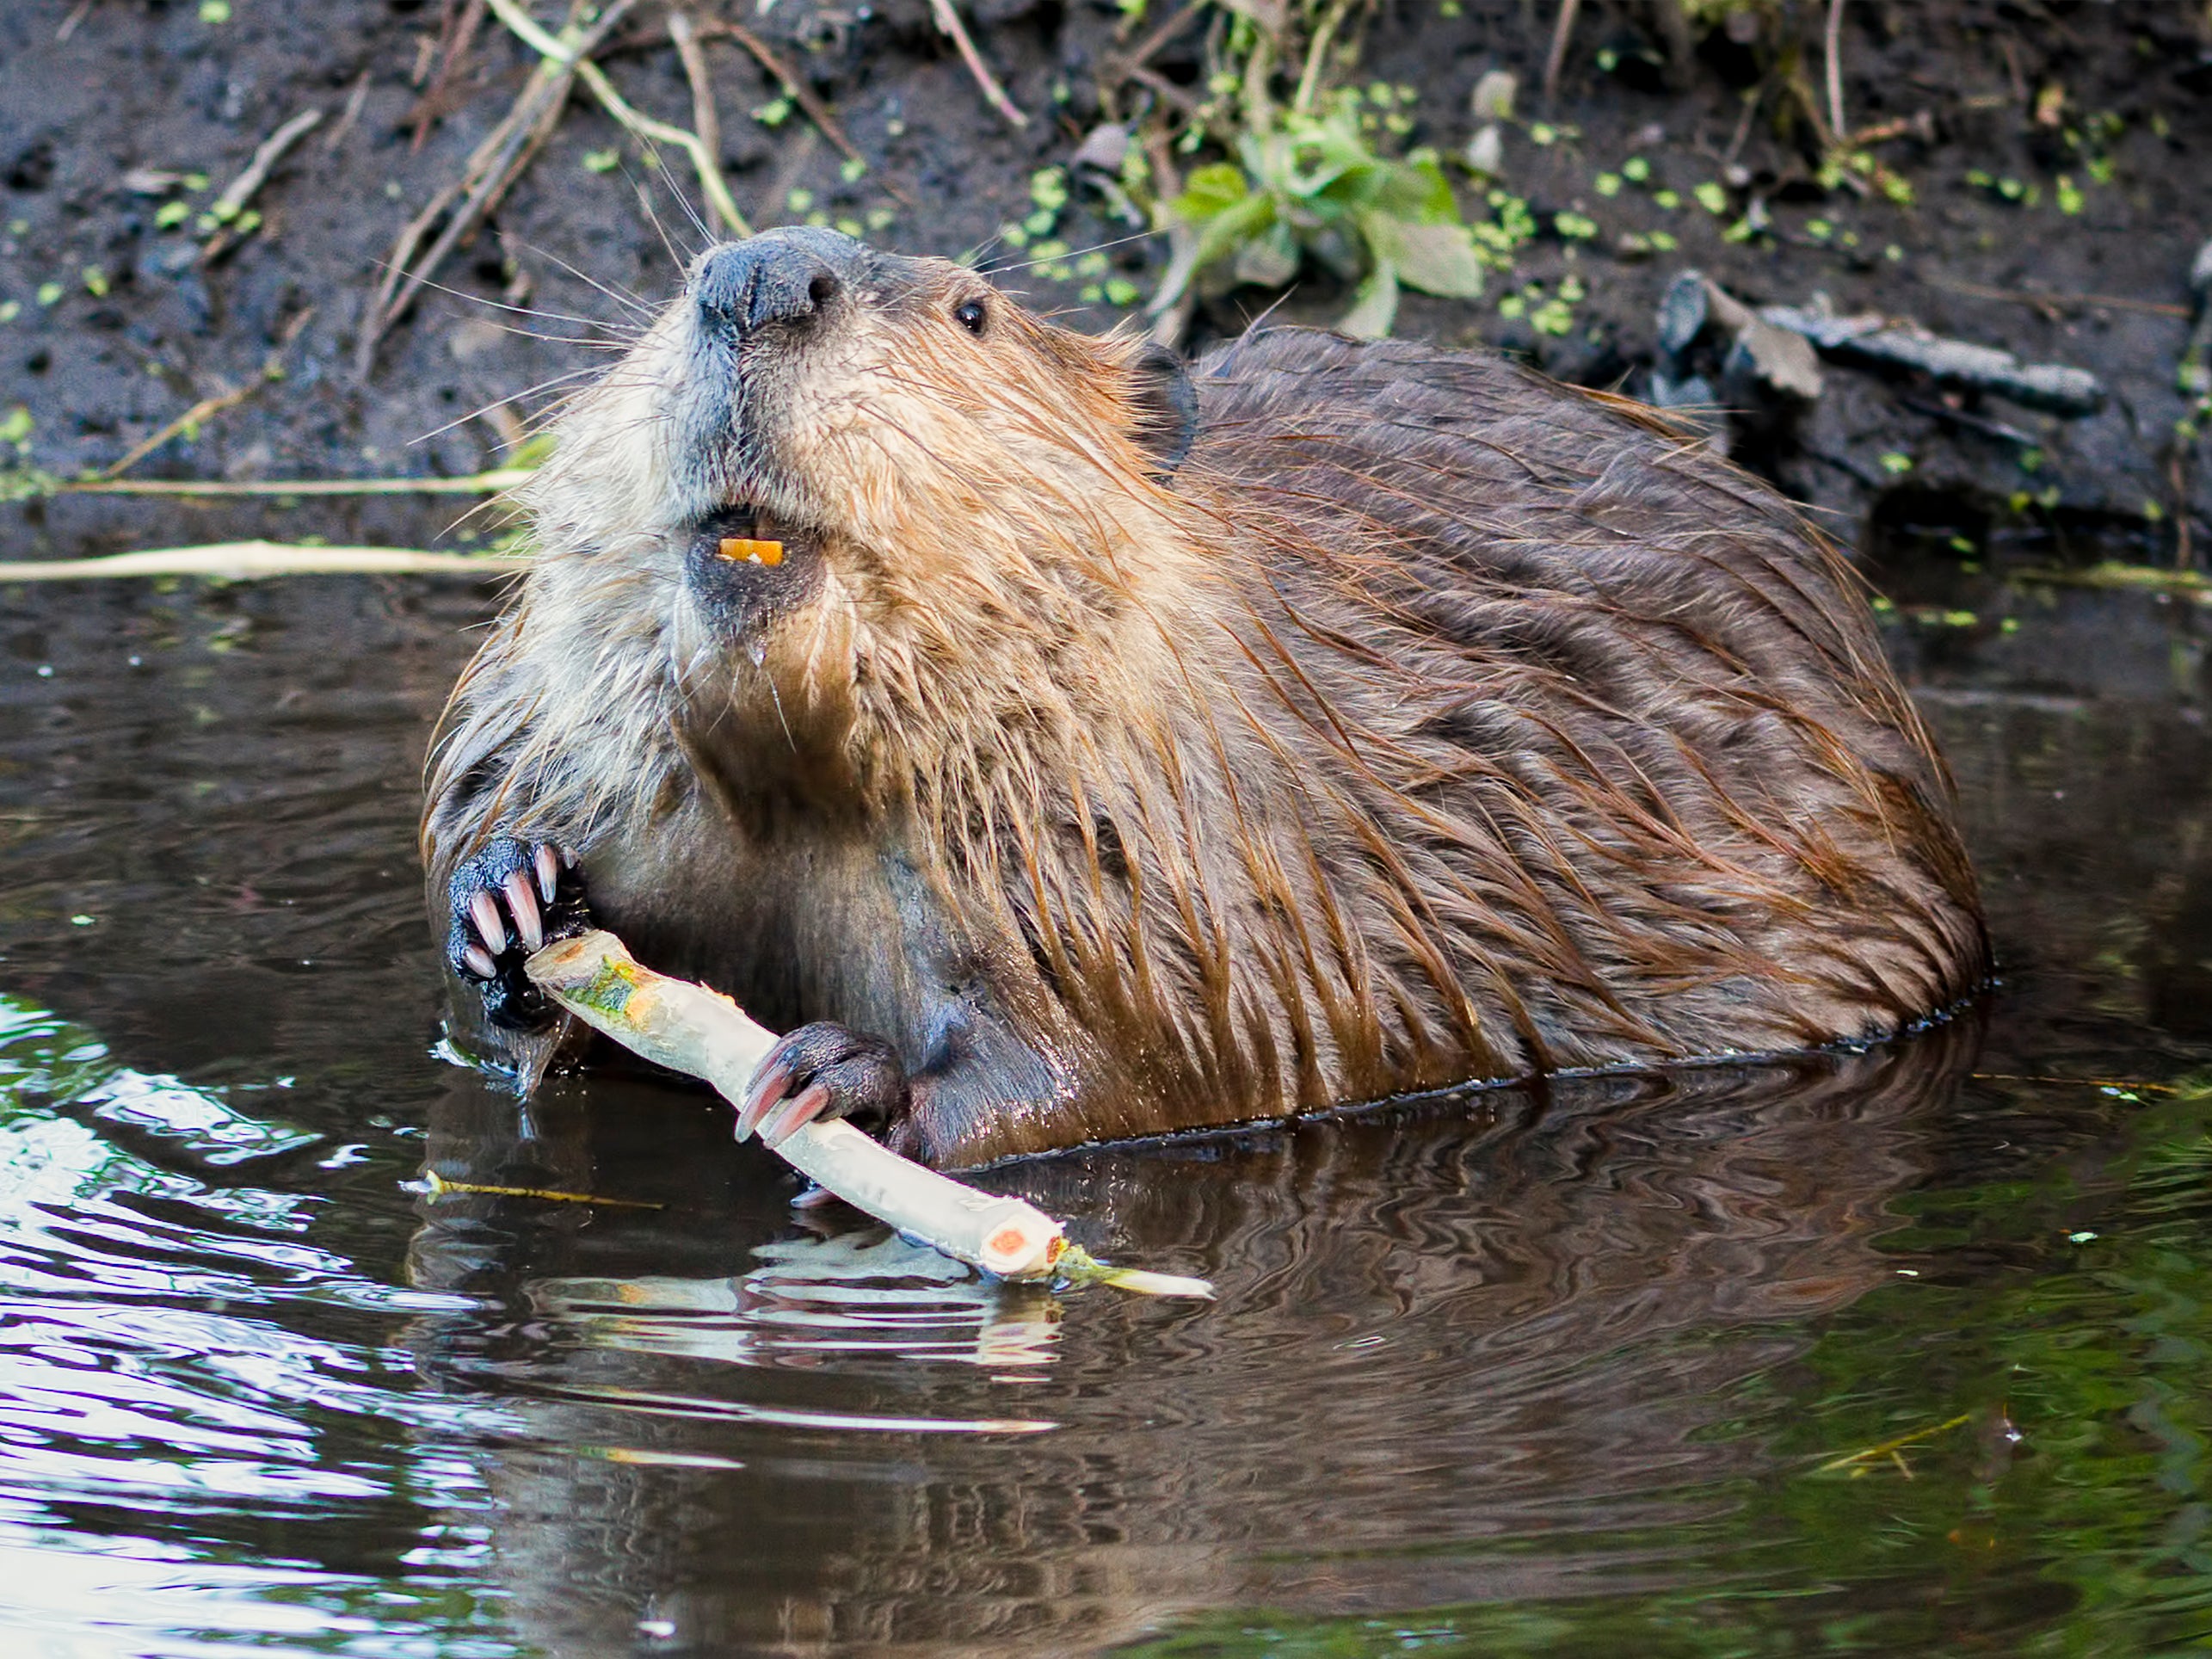 Beavers spend much of their time building and maintaining their homes